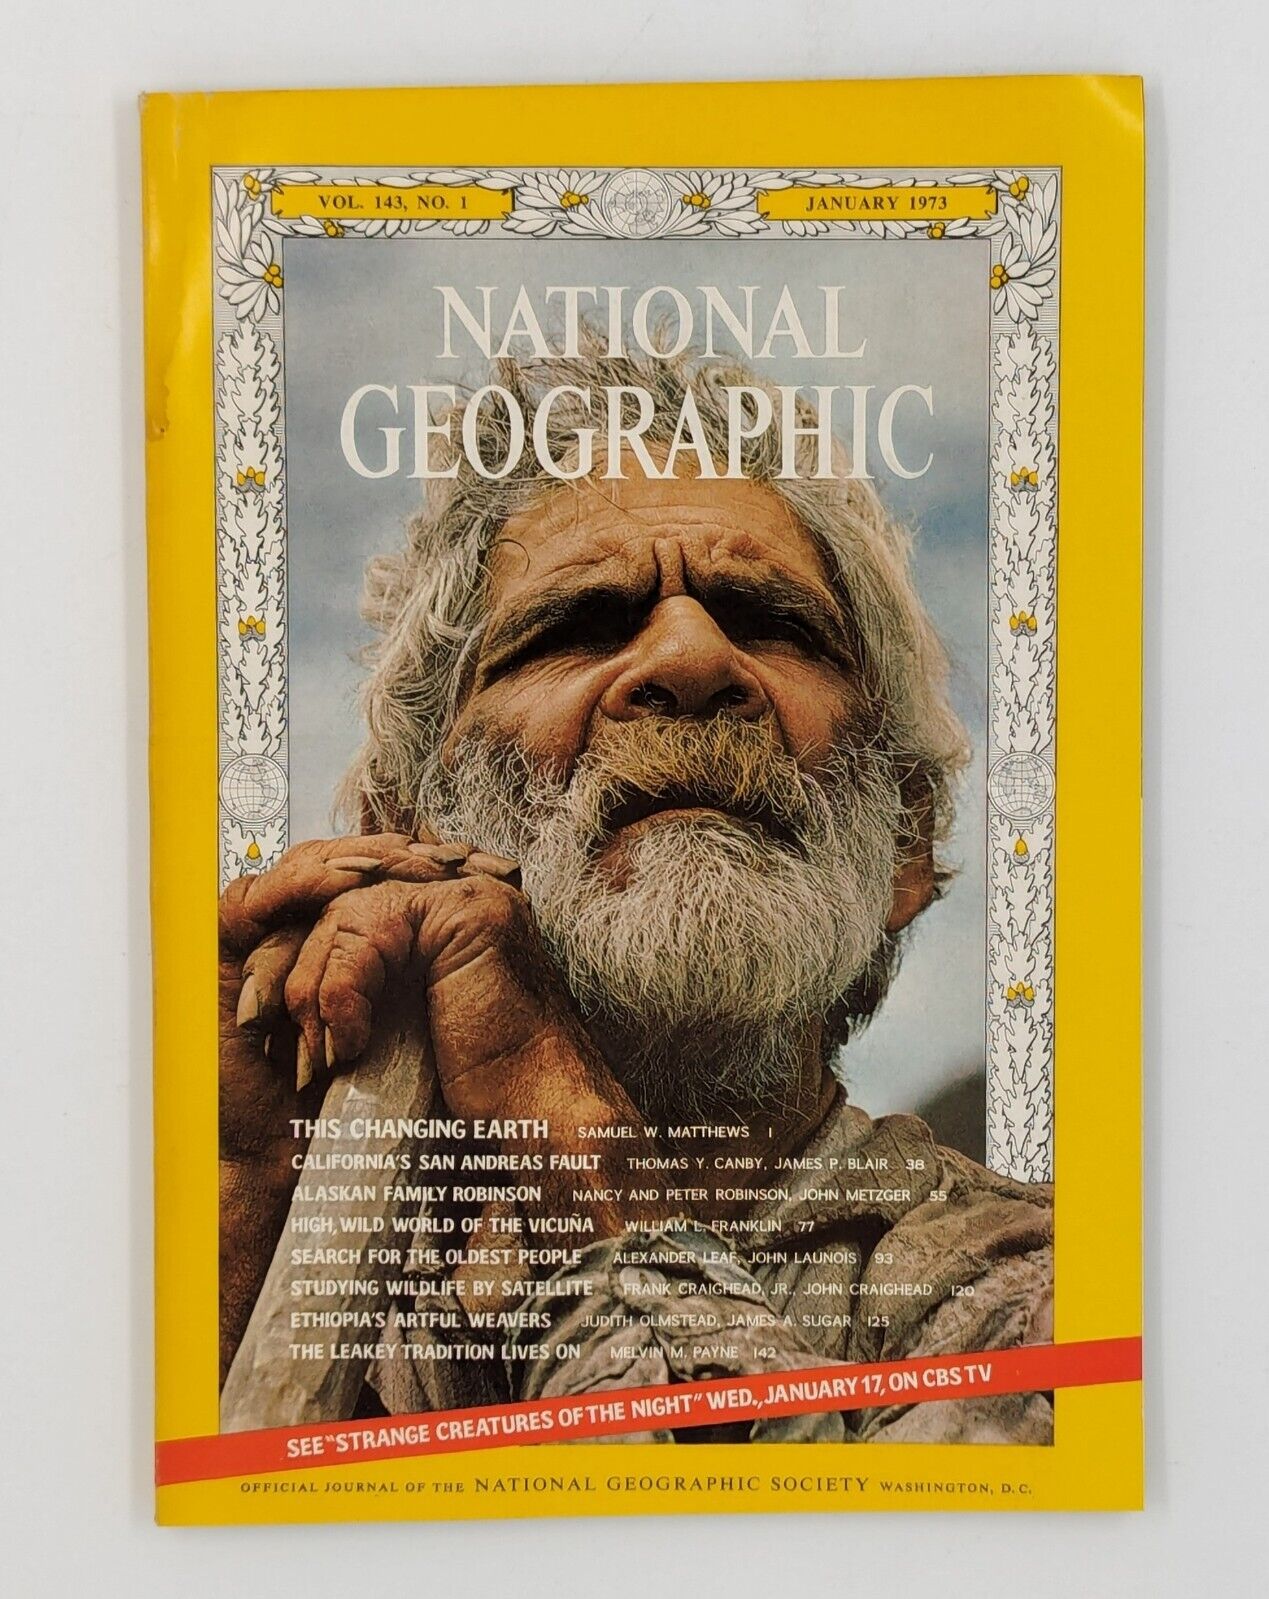 Vintage 1973 National Geographic Back Issues and Supplements - Your Choice